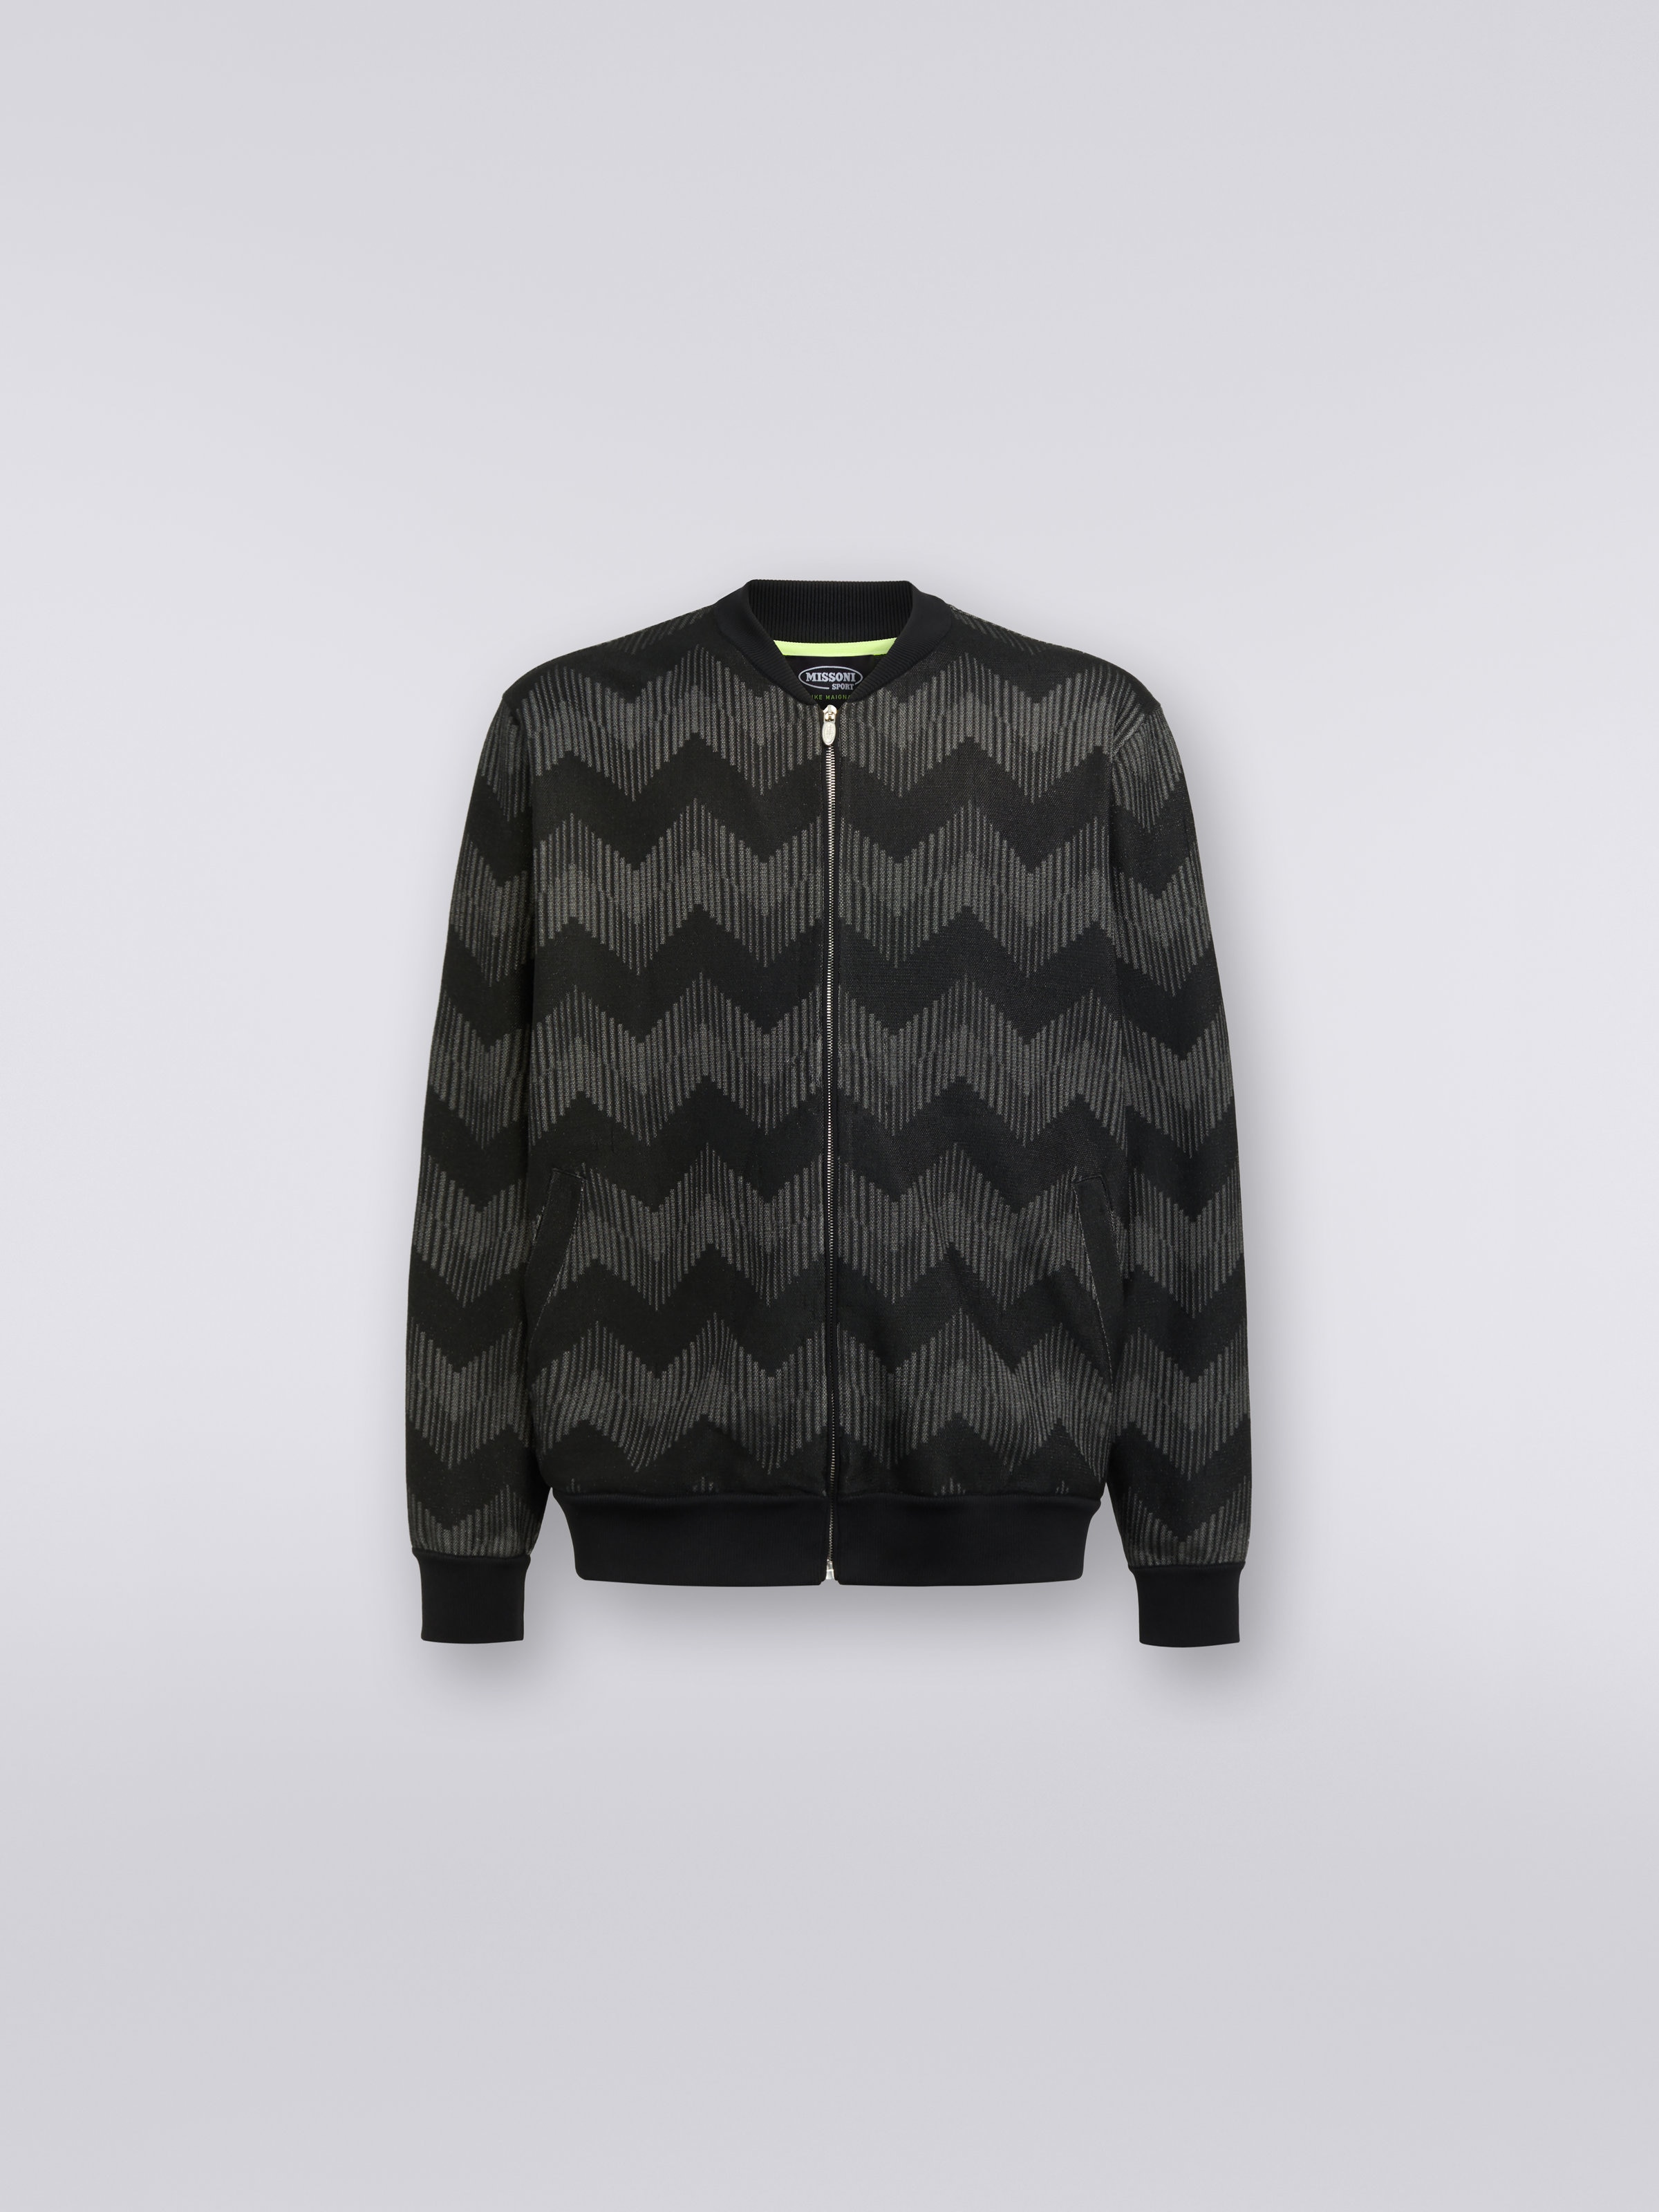 Cotton blend zigzag bomber jacket in collaboration with Mike Maignan, Black & White - 0